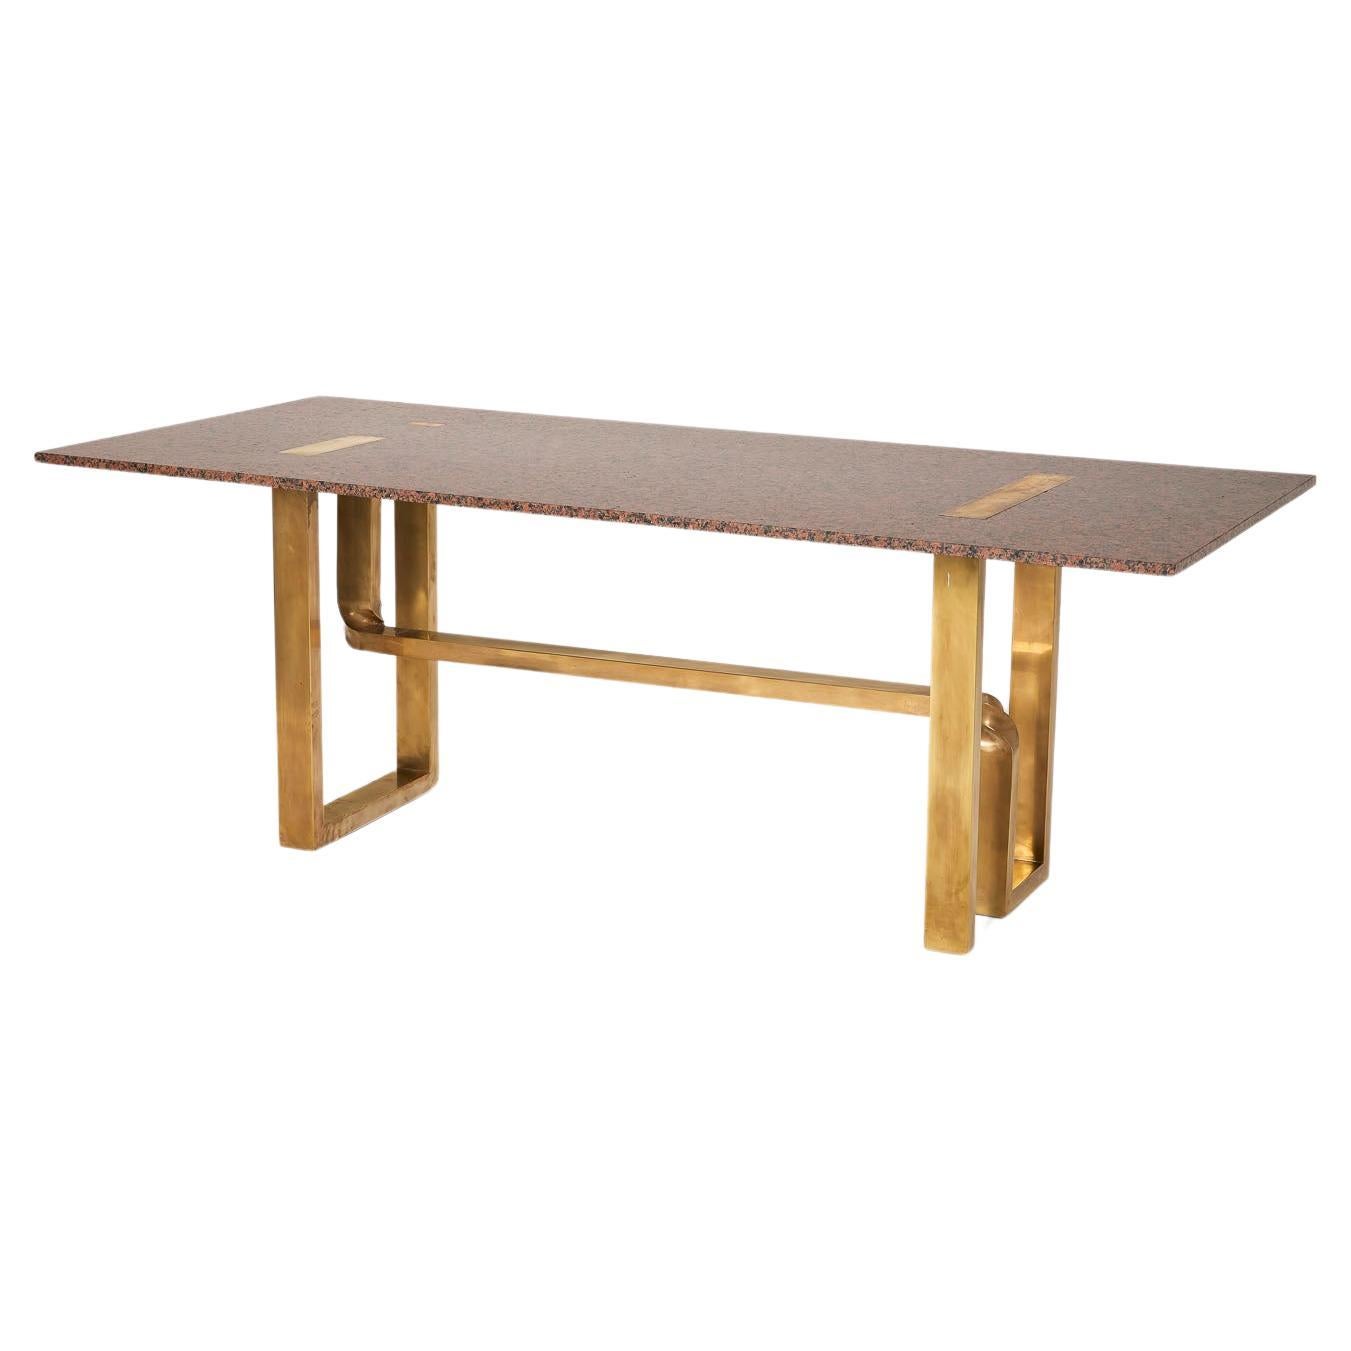 Pink granite and brass table by Alfredo Freda For Sale